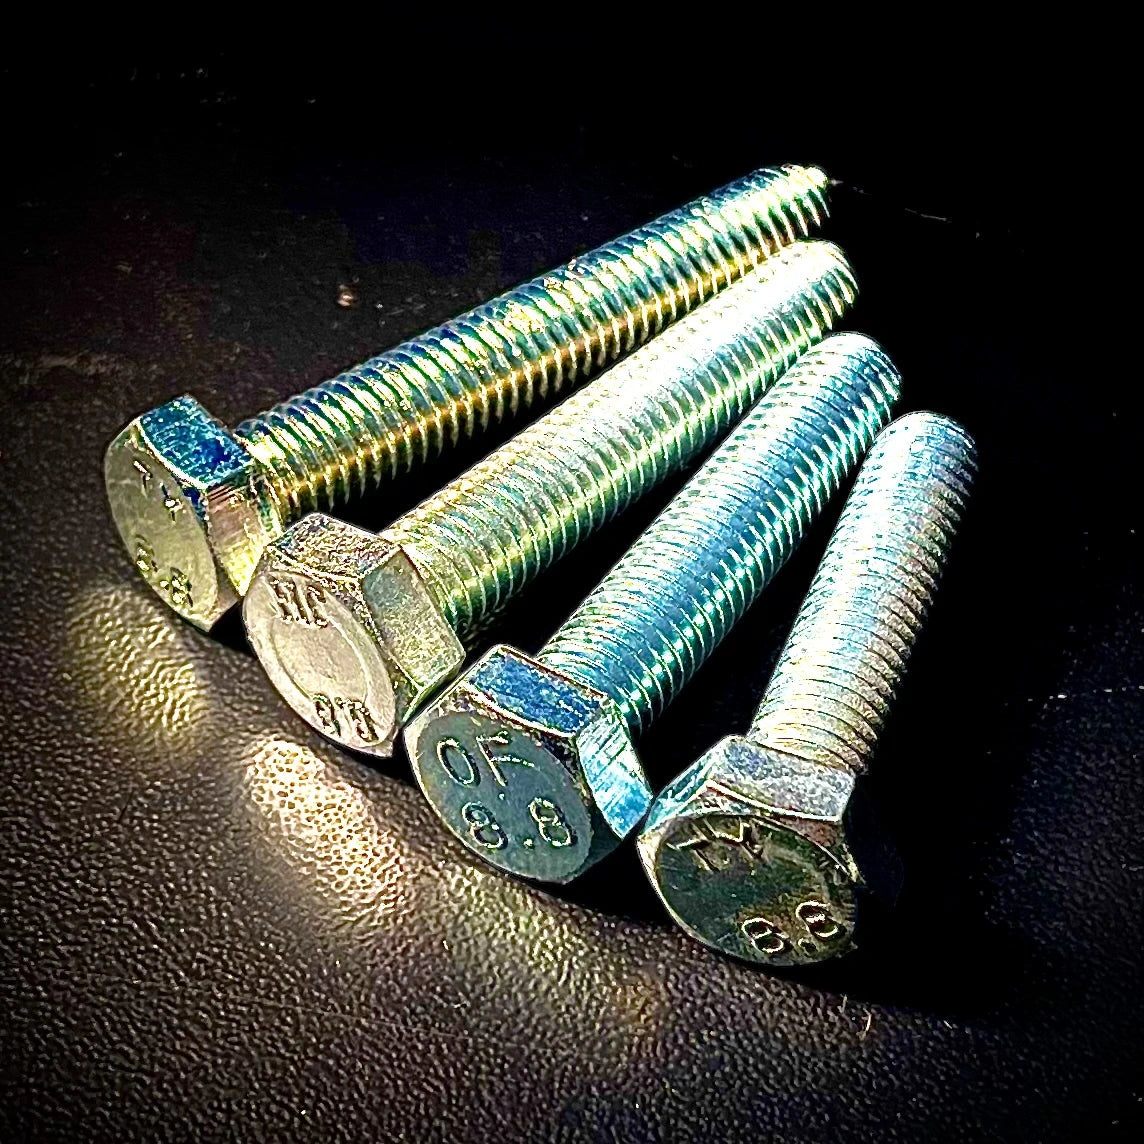 M10 x Under 55mm Hex Set Screw High Tensile 8.8 Zinc DIN933 - Fixaball Ltd. Fixings and Fasteners UK